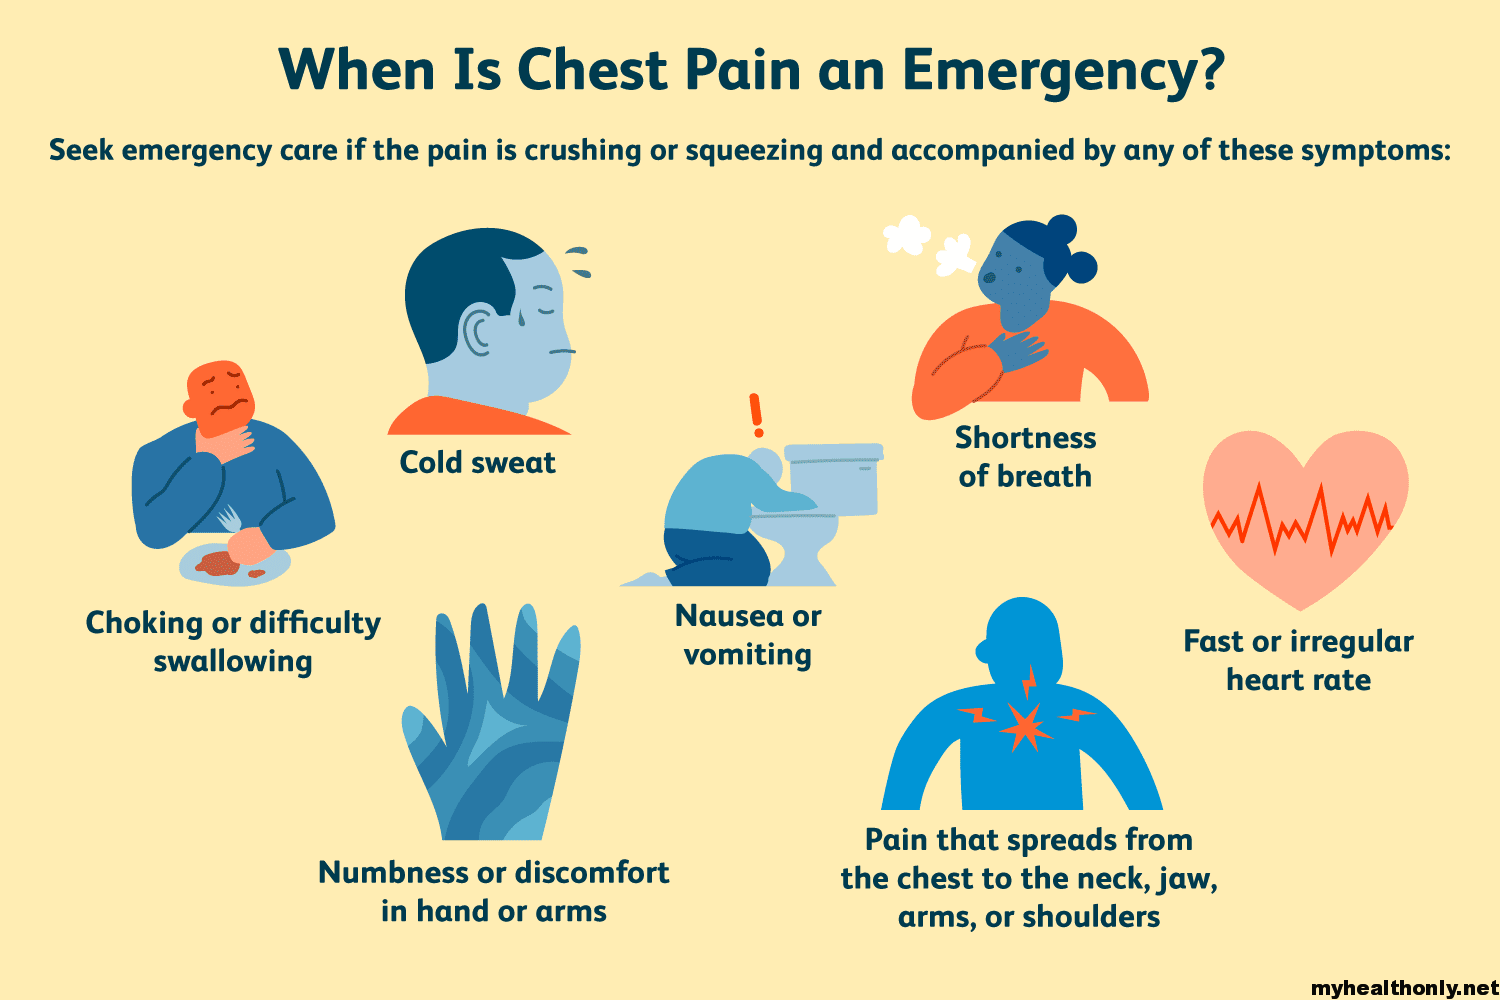 right-sided-chest-pain-symptoms-and-possible-causes-4116859-5c77334ec9e77c00012f815f.png?v=1588441553